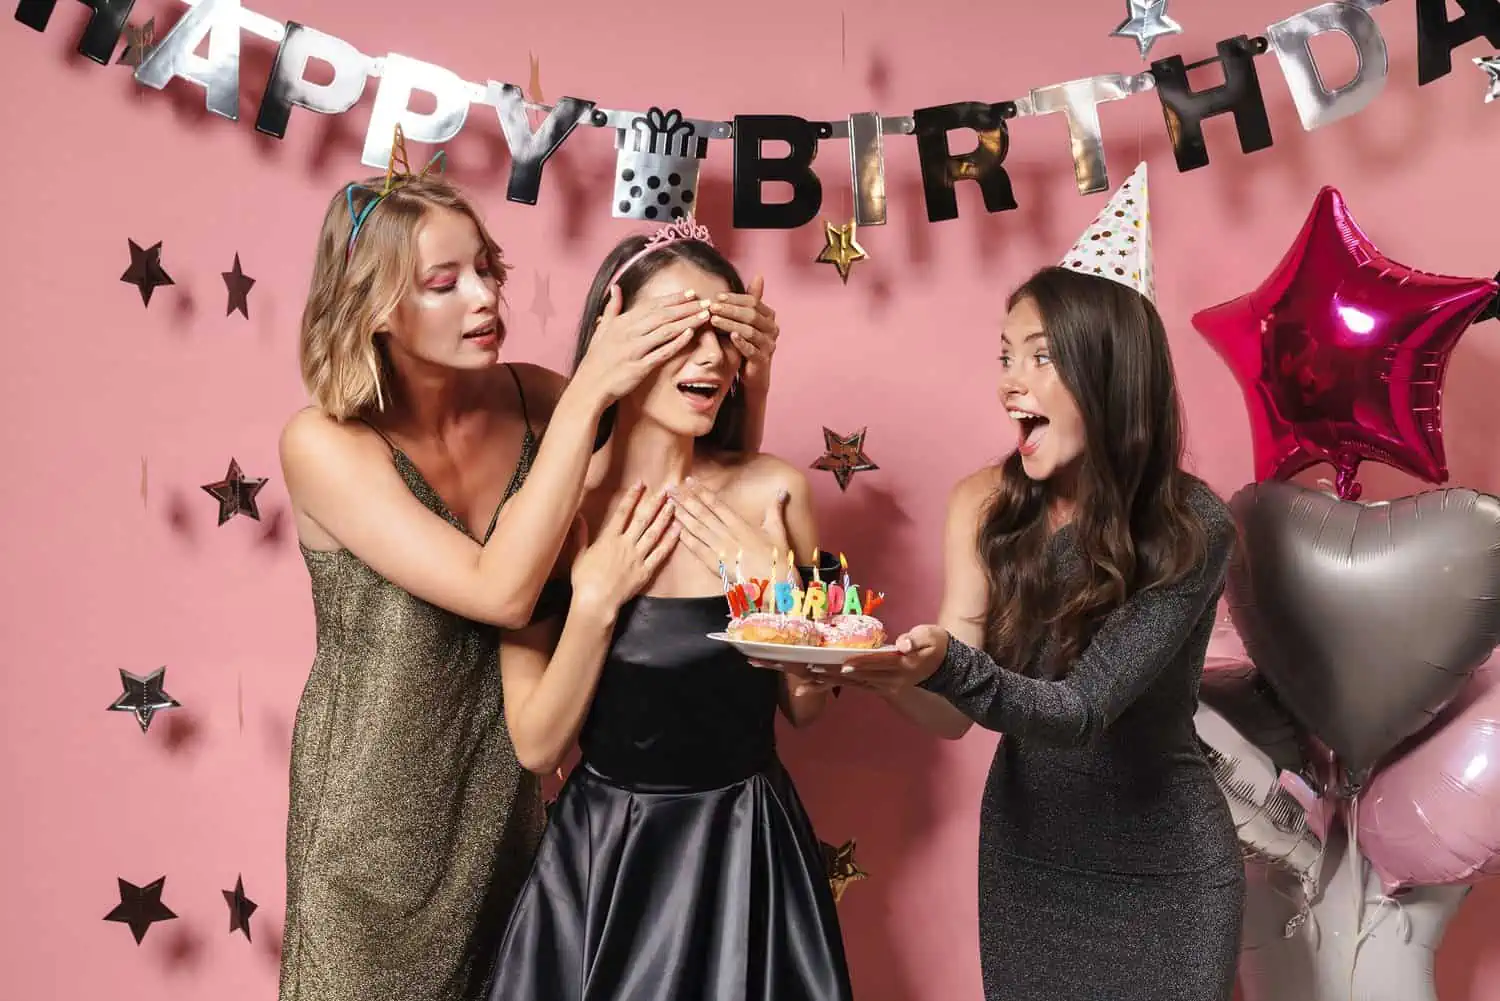 Friends holding cake and covering the eyes of birthday girl over pink wall with elegant decor